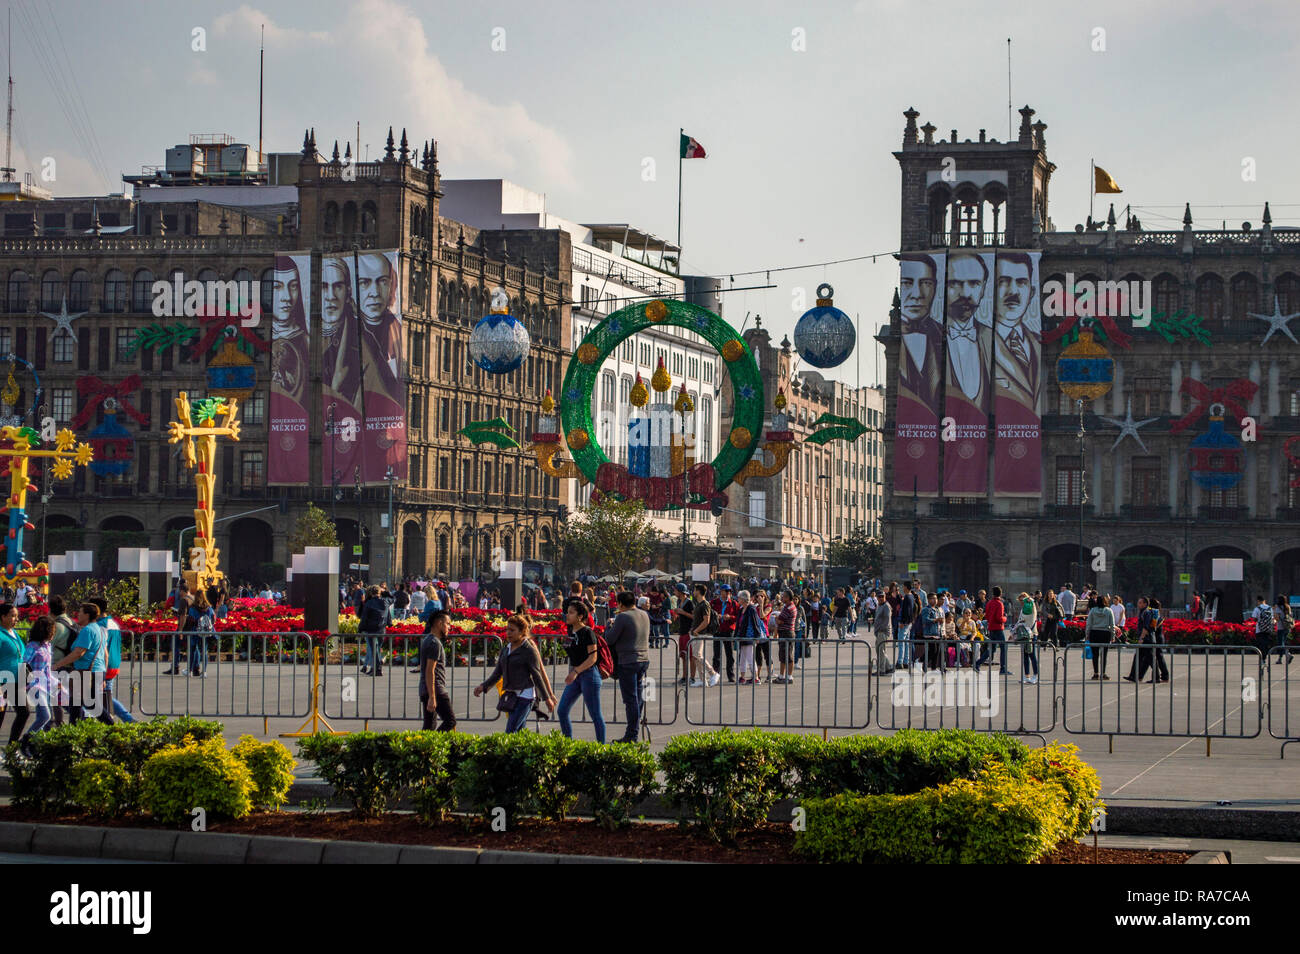 Christmas decorations in the Zocalo in Mexico City, Mexico Stock Photo